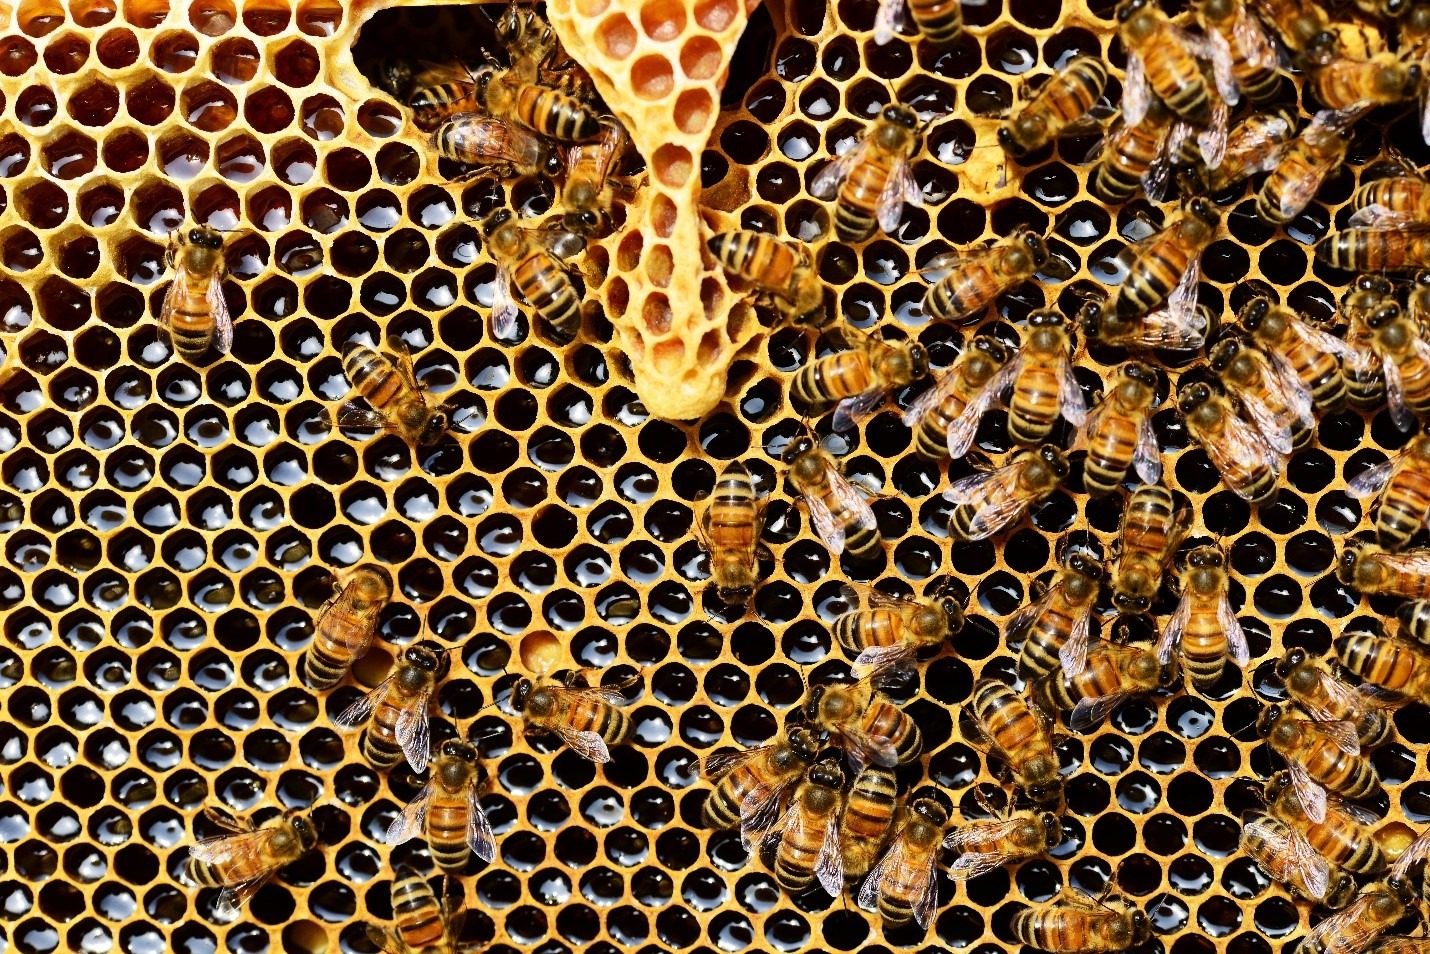 Why Bees Are Important to Humans